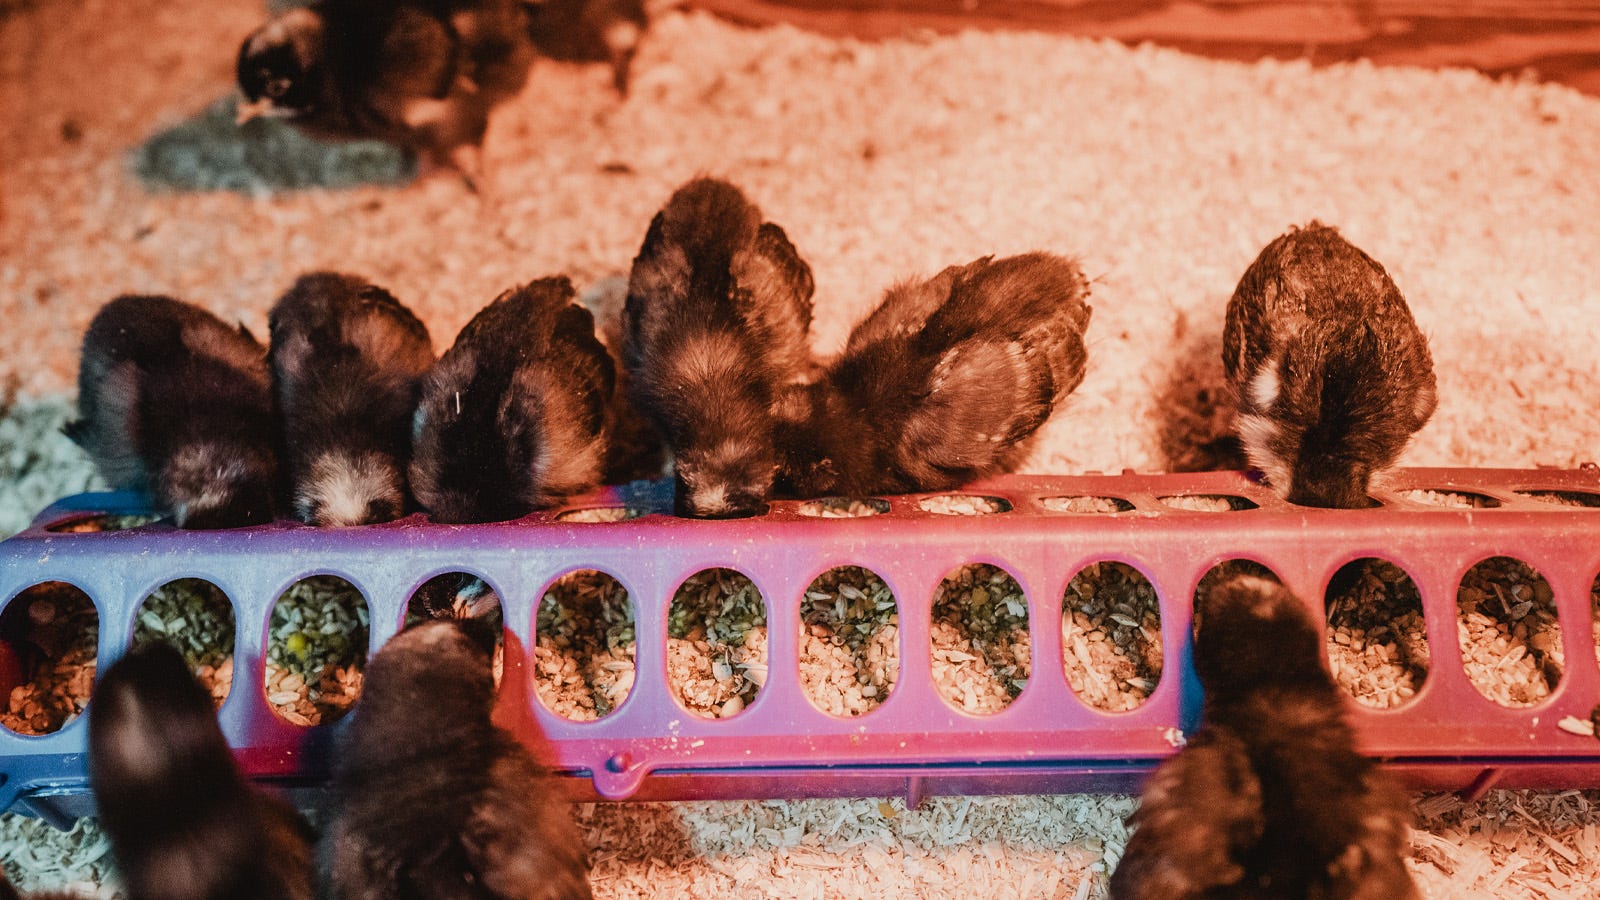 Chicks eating out of a feeder inside of a brooder